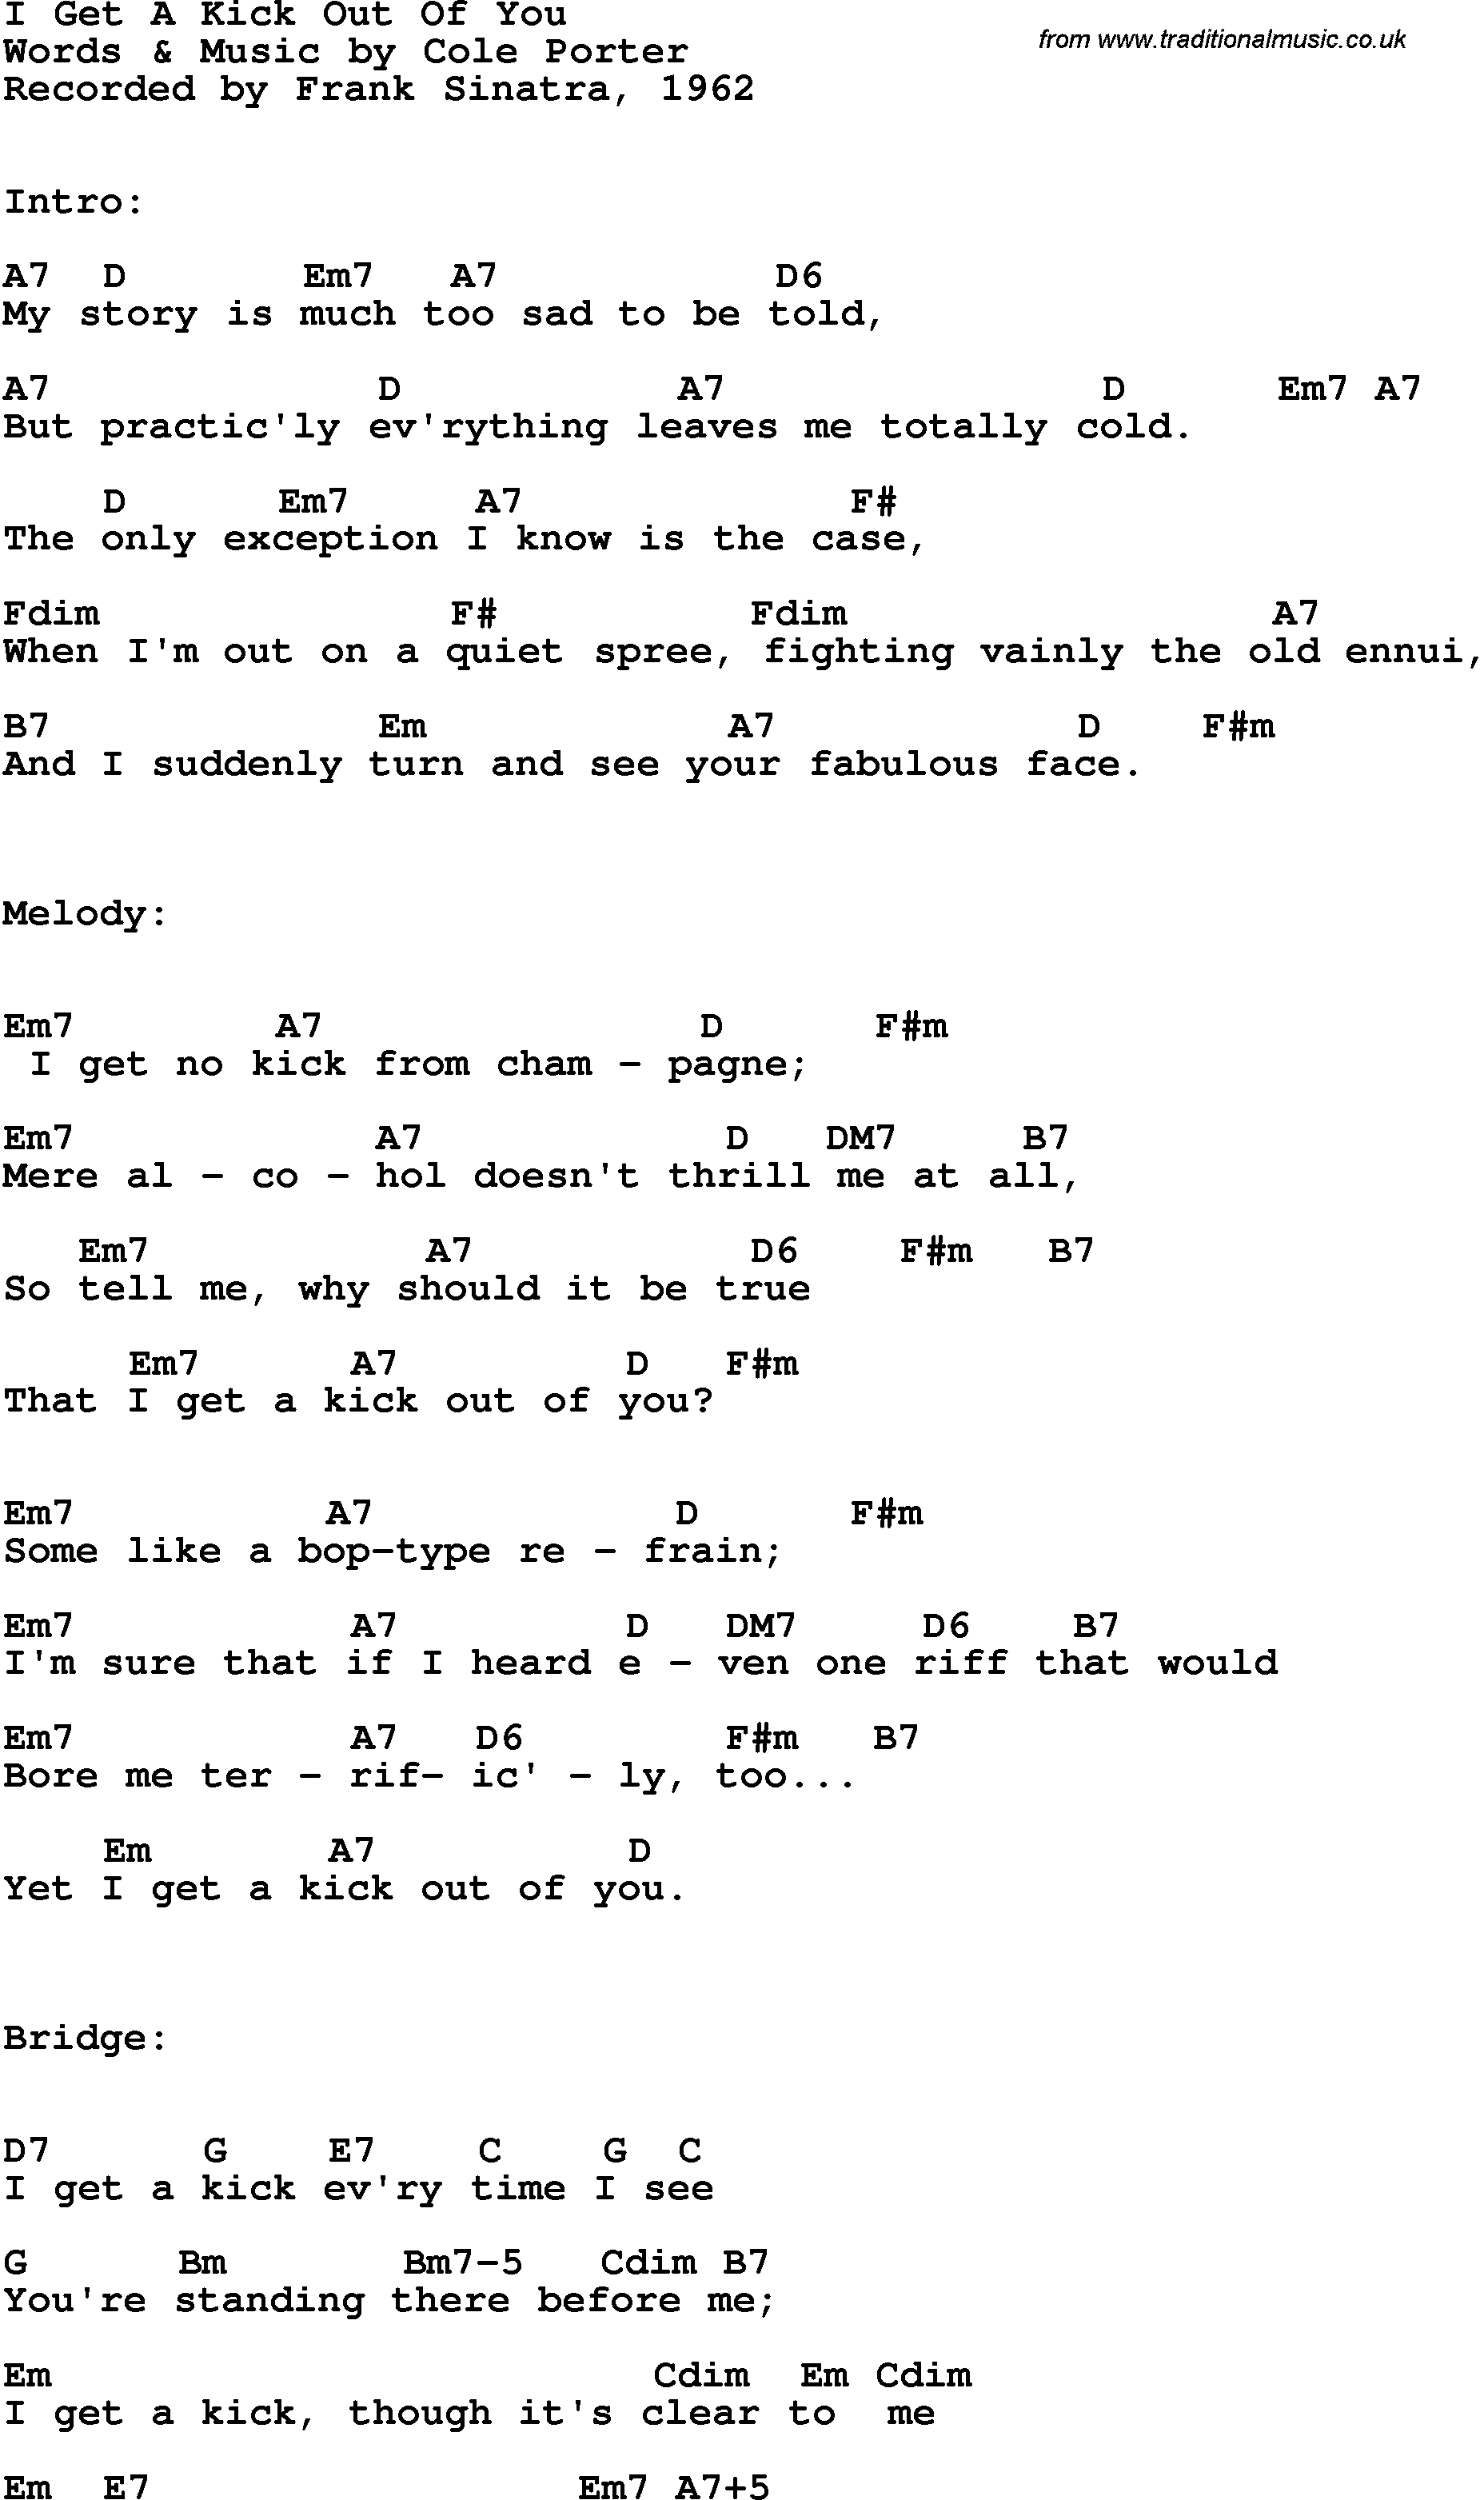 Song Lyrics with guitar chords for I Get A Kick Out Of You - Frank Sinatra, 1962